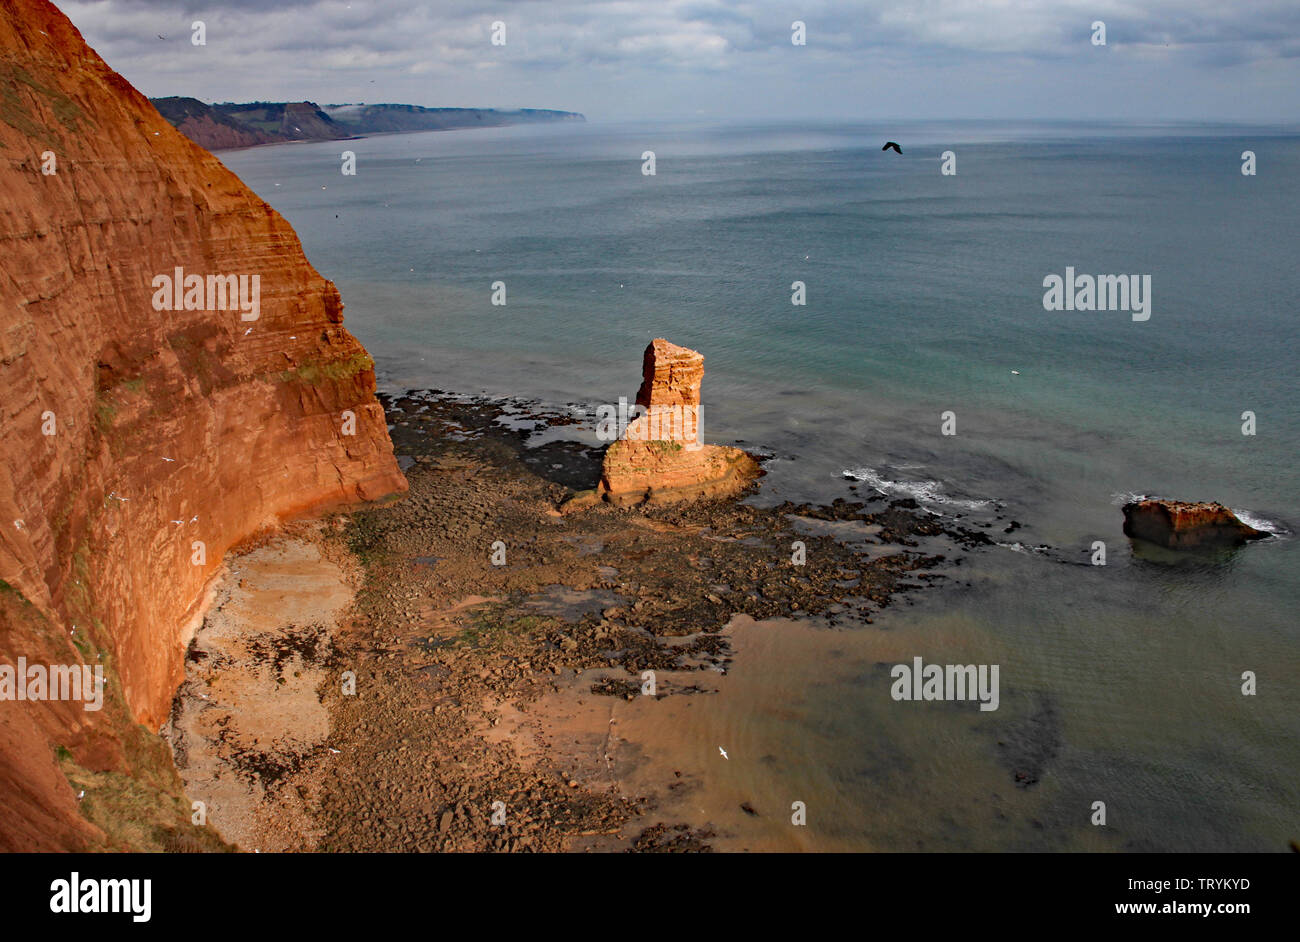 A sandstone sea stack at Ladram Bay near Sidmouth, Devon. Part of the south west coastal path. Stock Photo